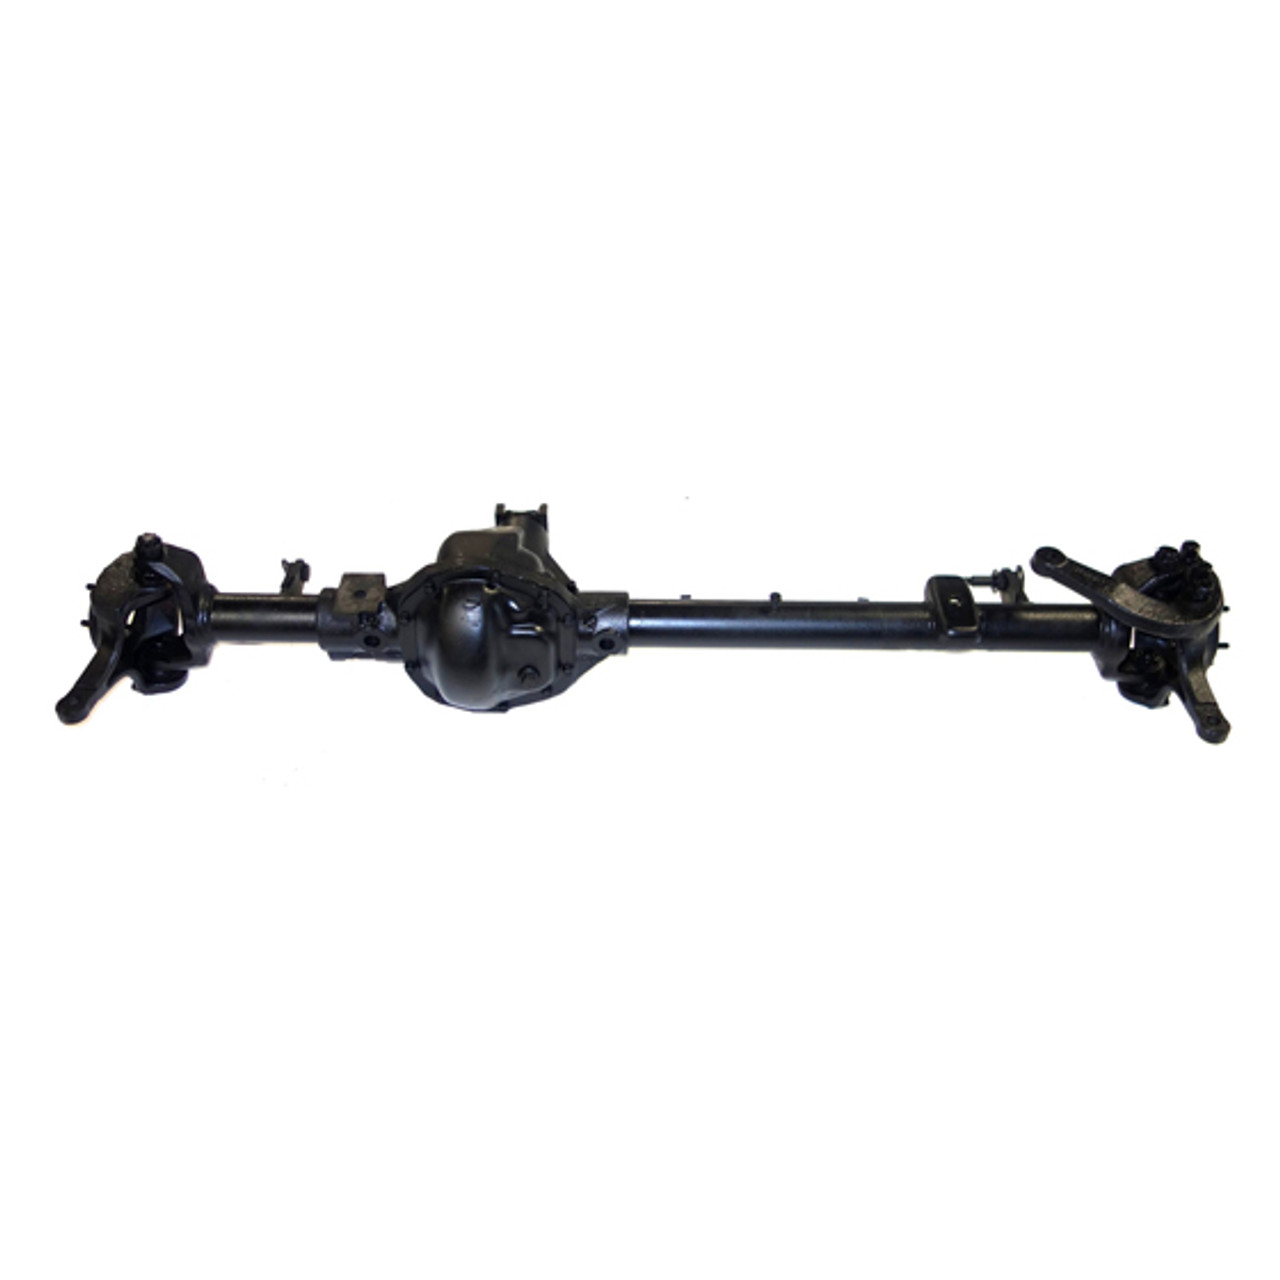 Reman Complete Axle Assembly for Dana 44 2001 Dodge Ram 1500 4.11 Ratio with 4 Wheel ABS